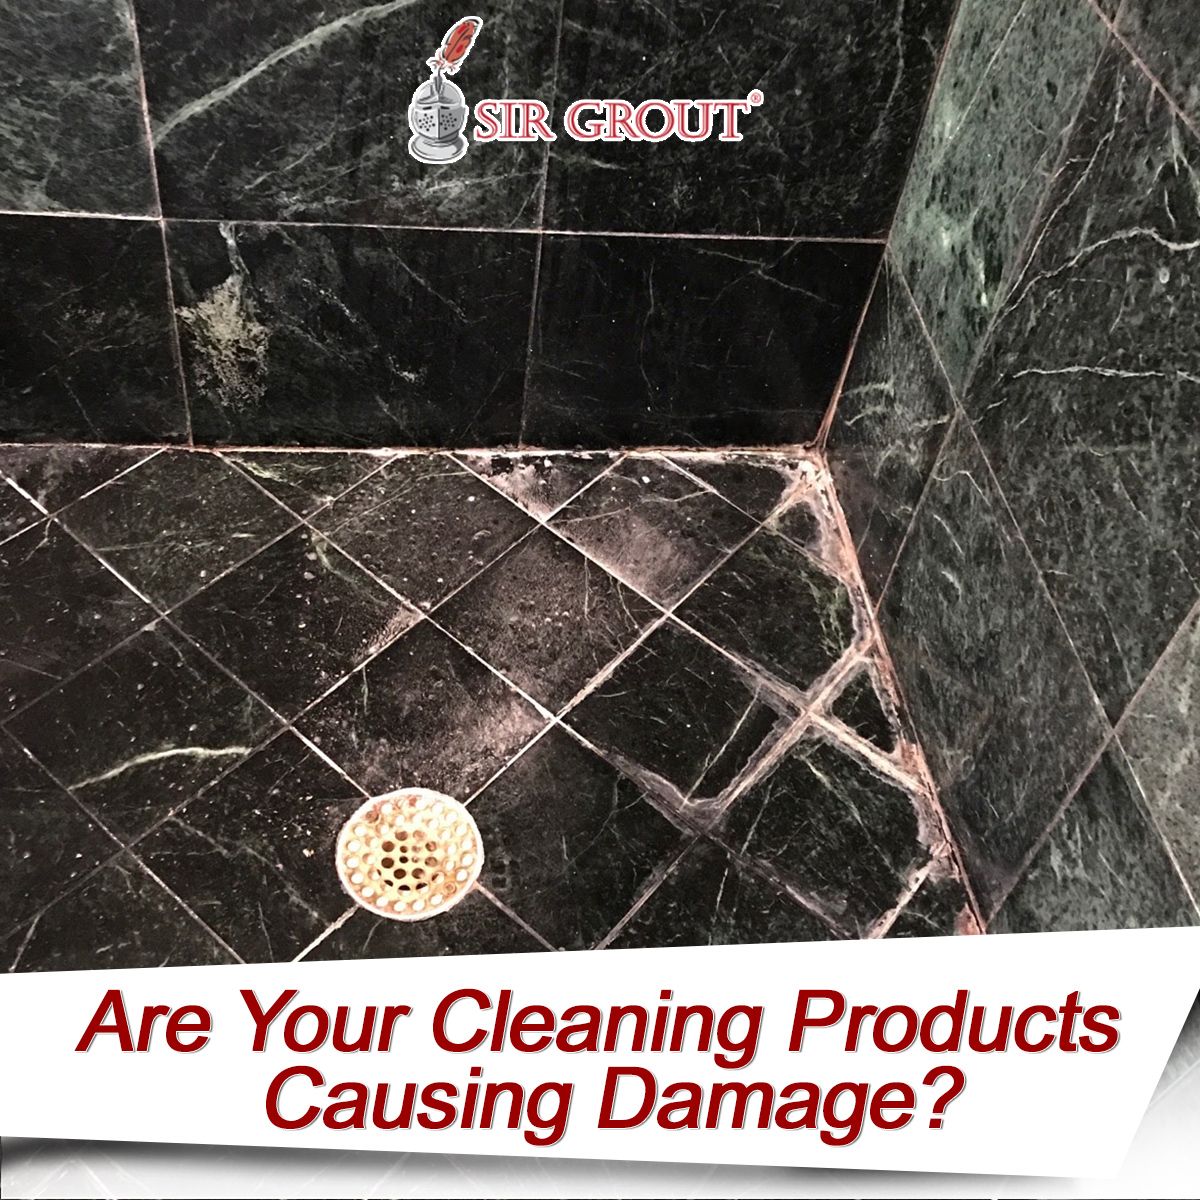 Are Your Cleaning Products Causing Damage?